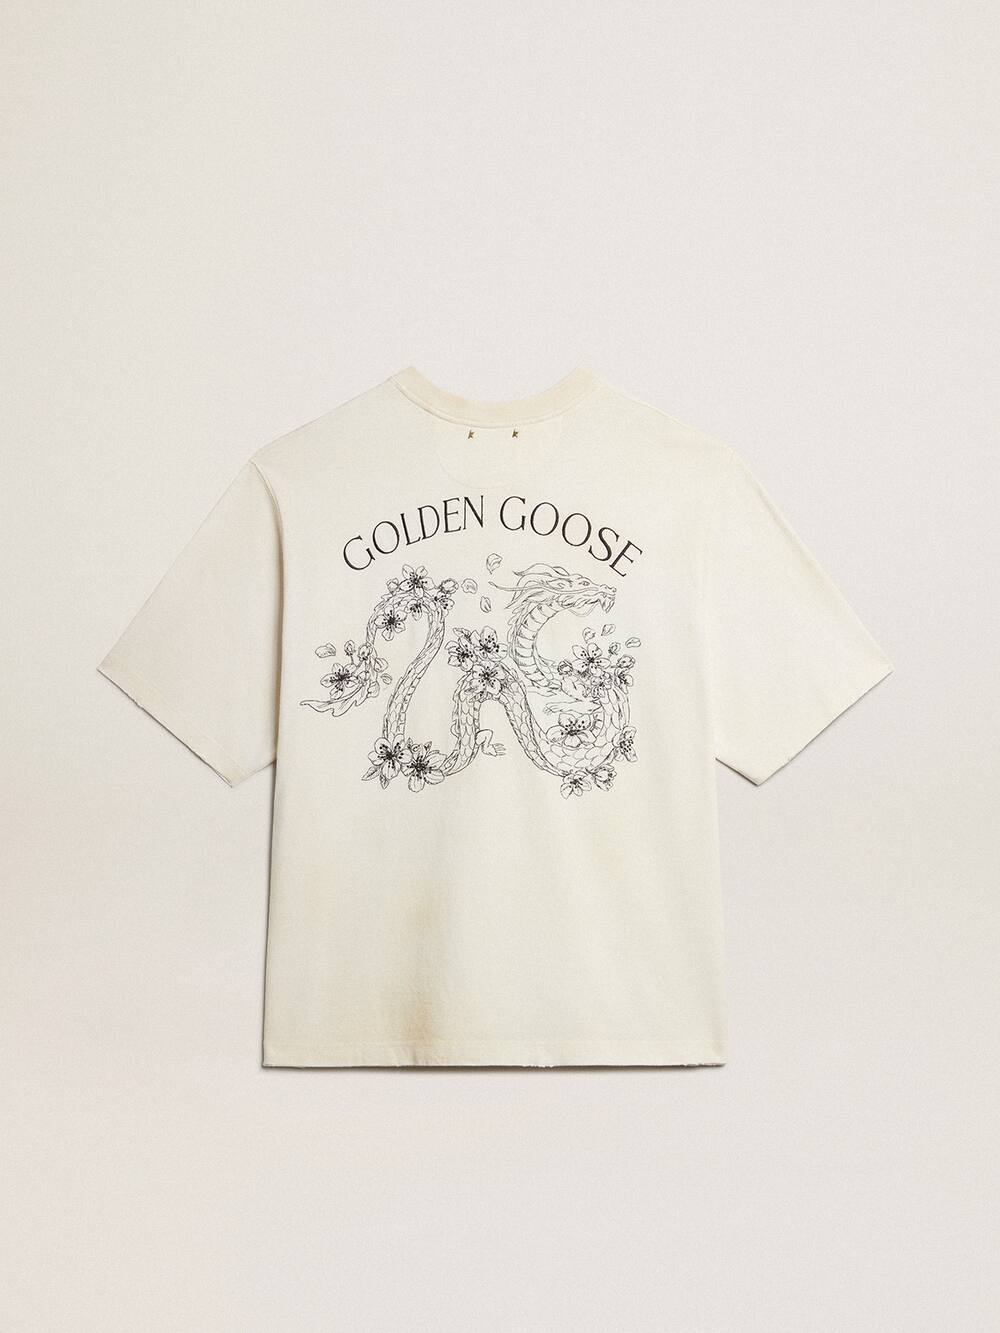 Golden Goose - Aged white CNY T-shirt in 